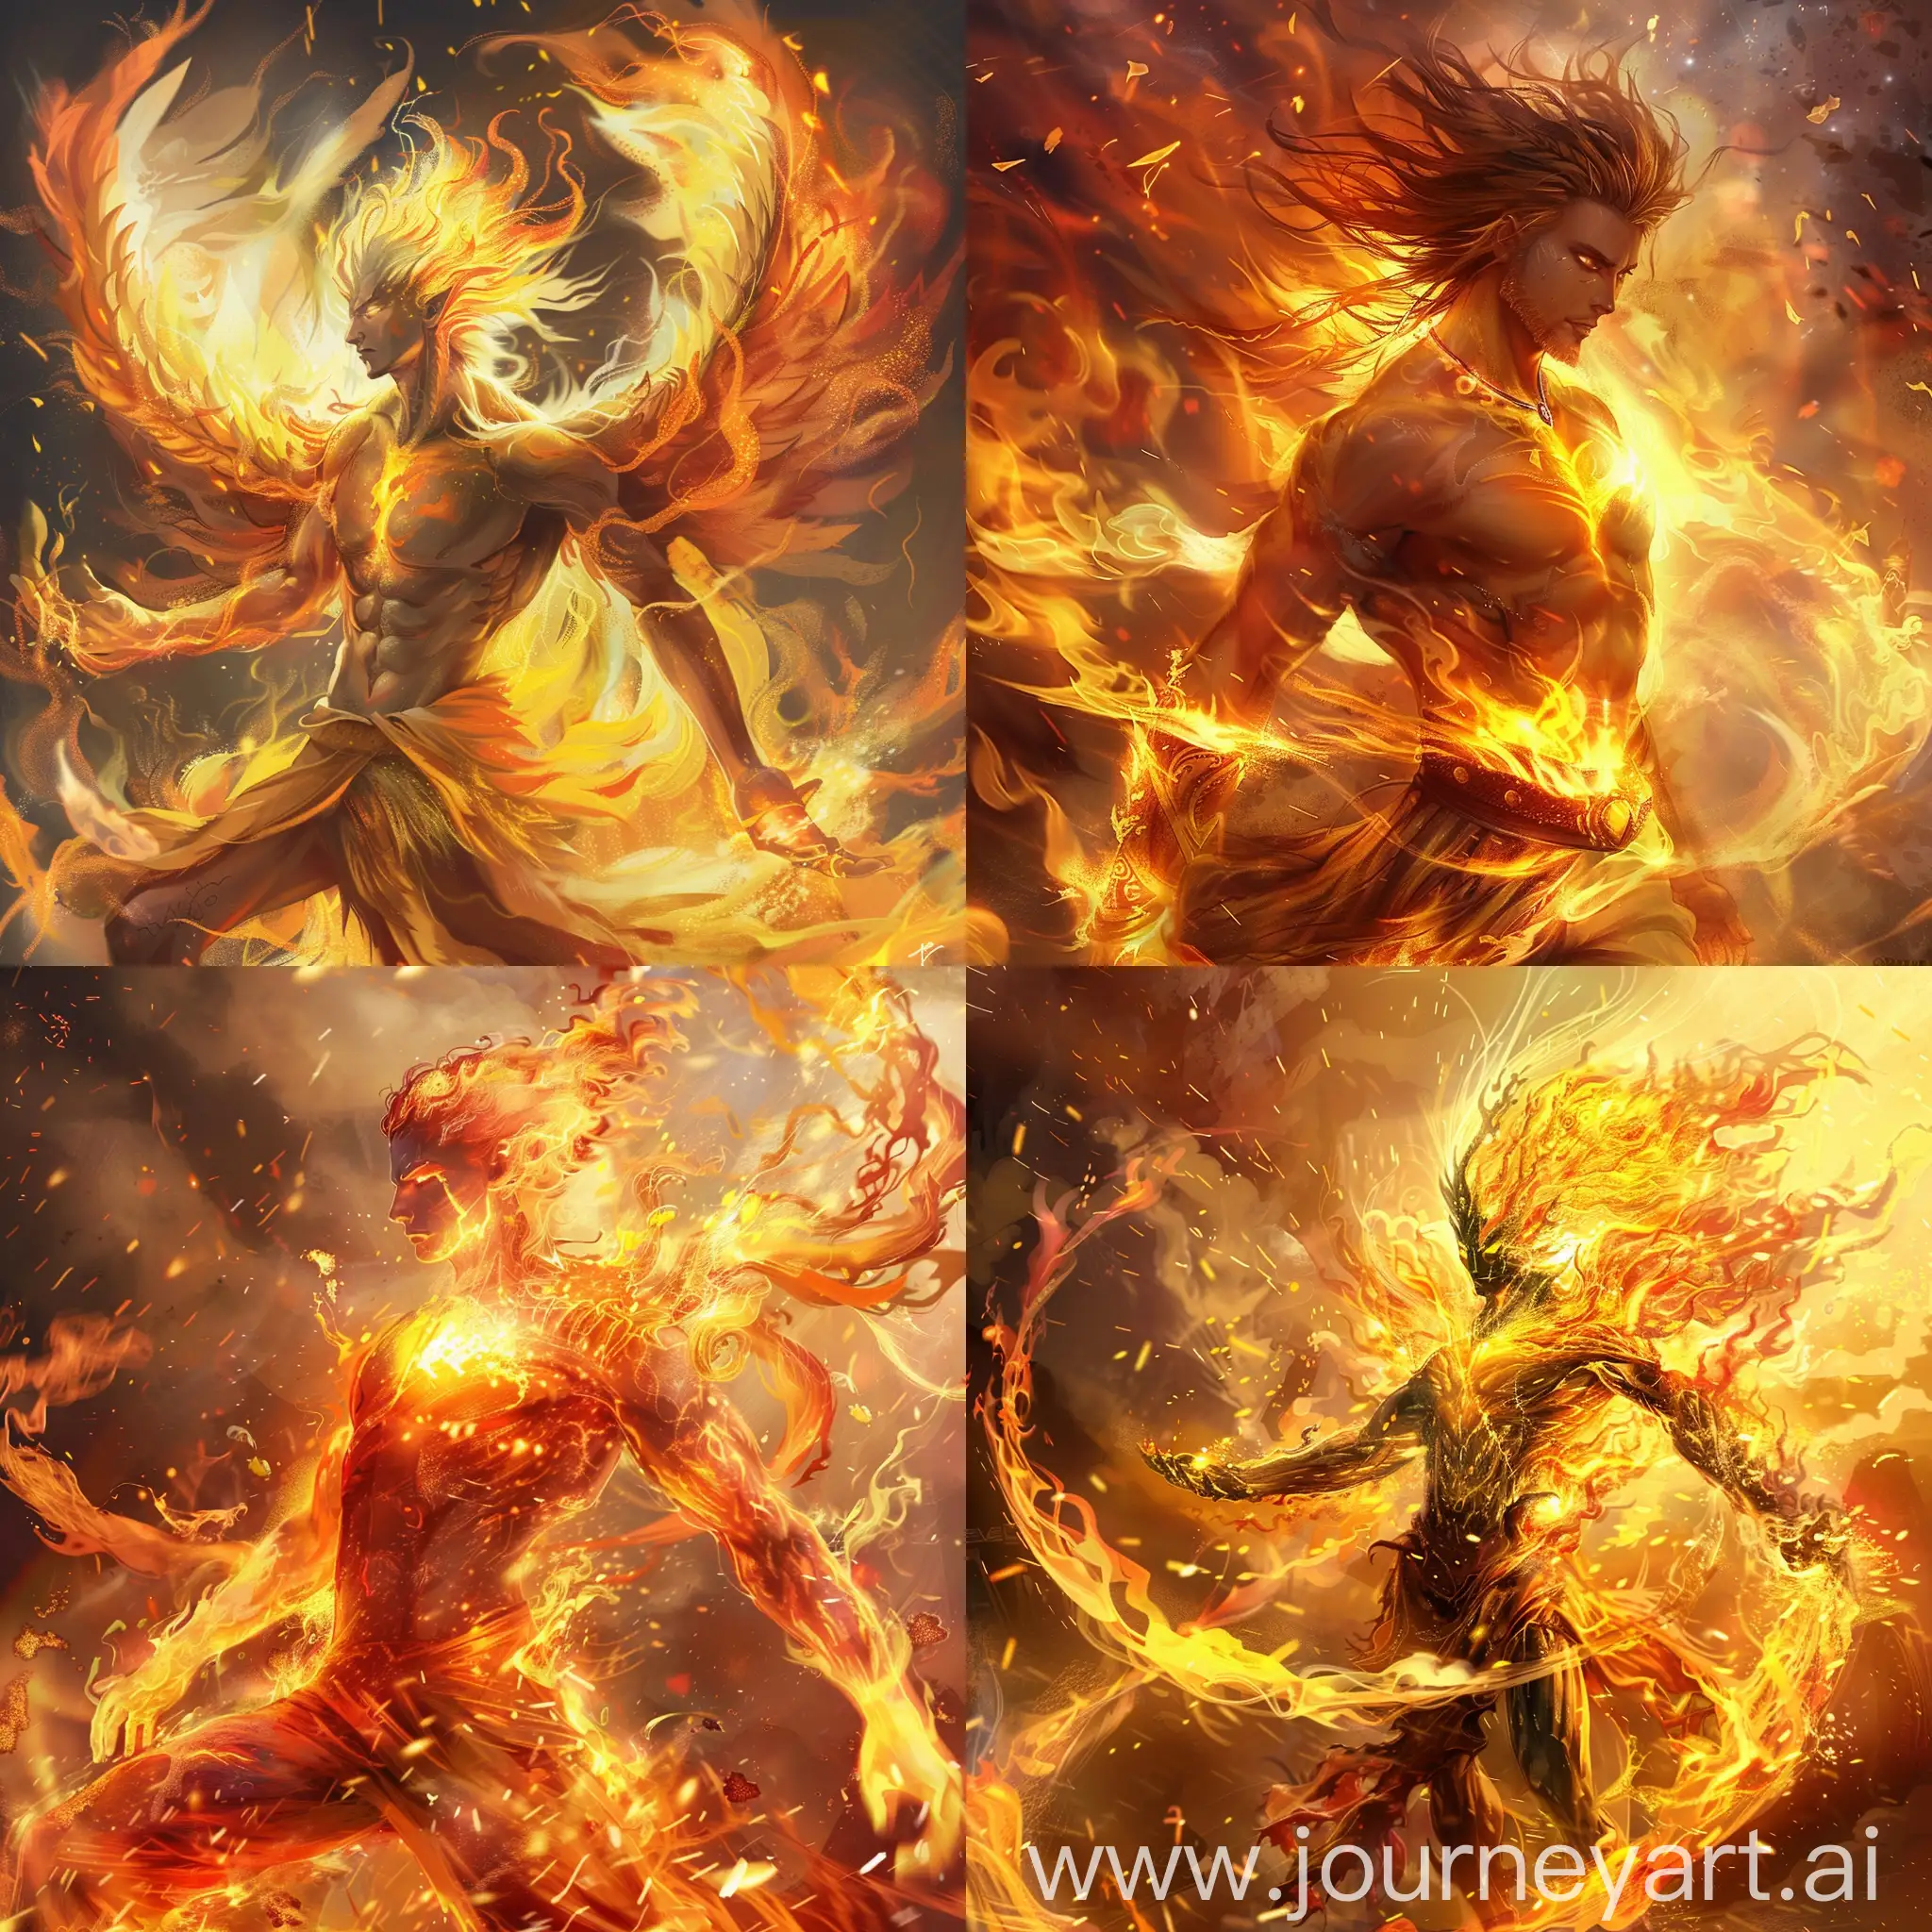 Ignis-the-Divine-Master-of-Flames-Mesmerizing-Fire-Elemental-Art